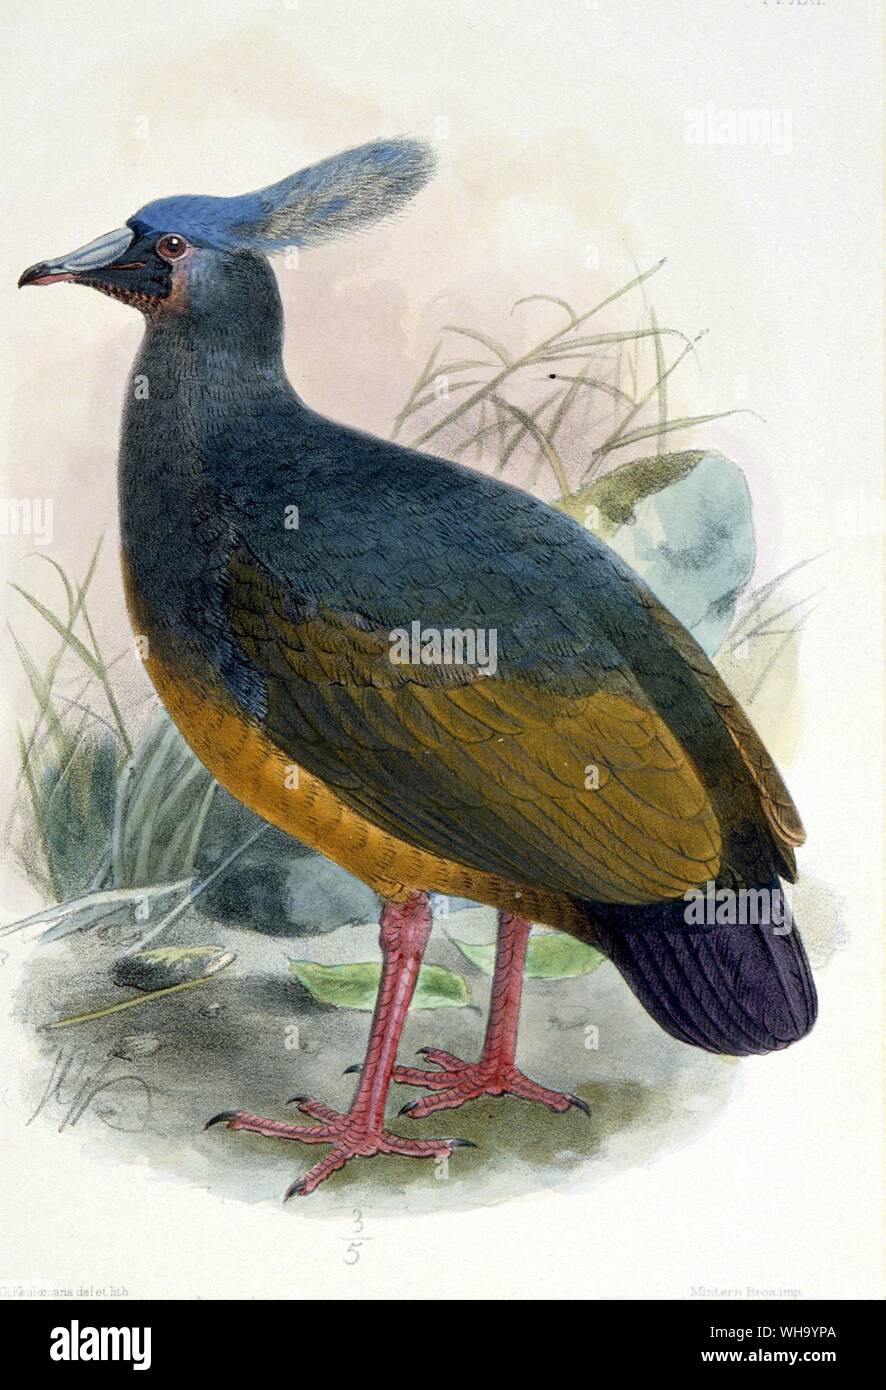 Choiseul Crested Pigeon.  Hand-coloured lithograph by J.G. Keulemans from Novilates Zoologicae, Vol. 11 (1904) - Length of bird 30cm (12in) Stock Photo